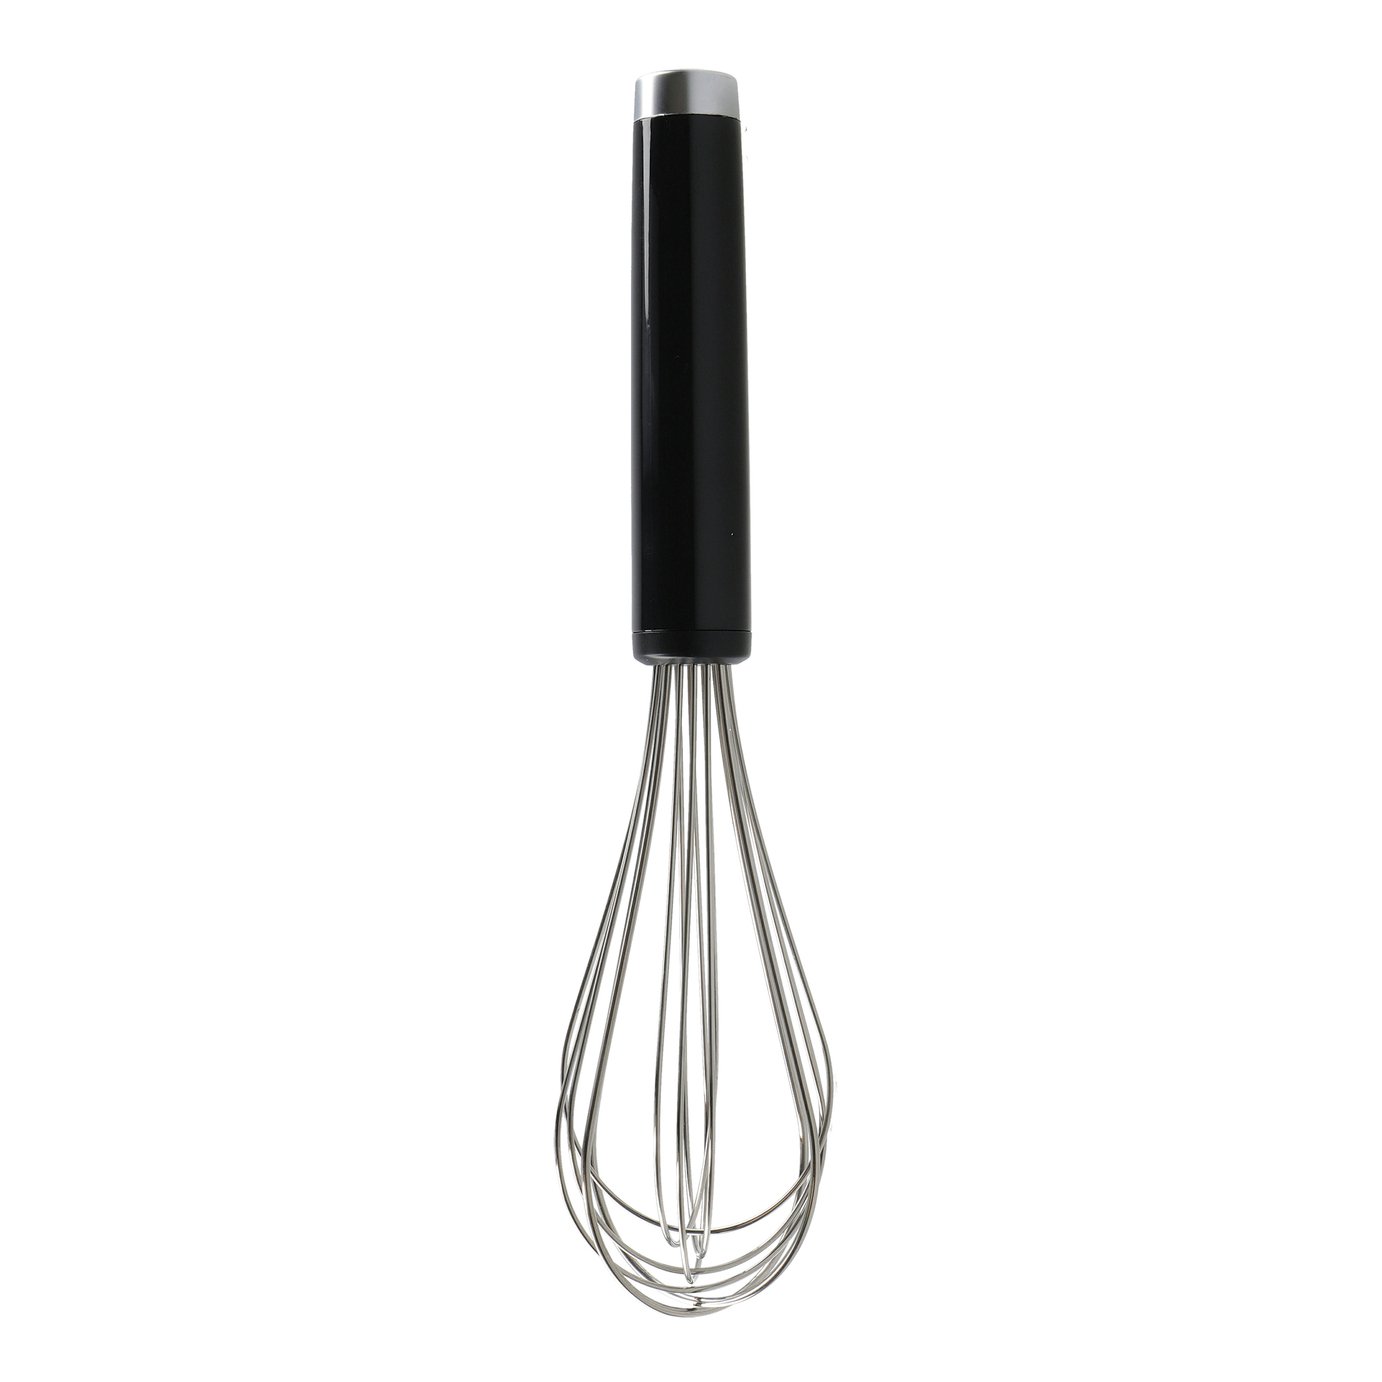 KitchenAid Classic Stainless Steel Utility Whisk - Black